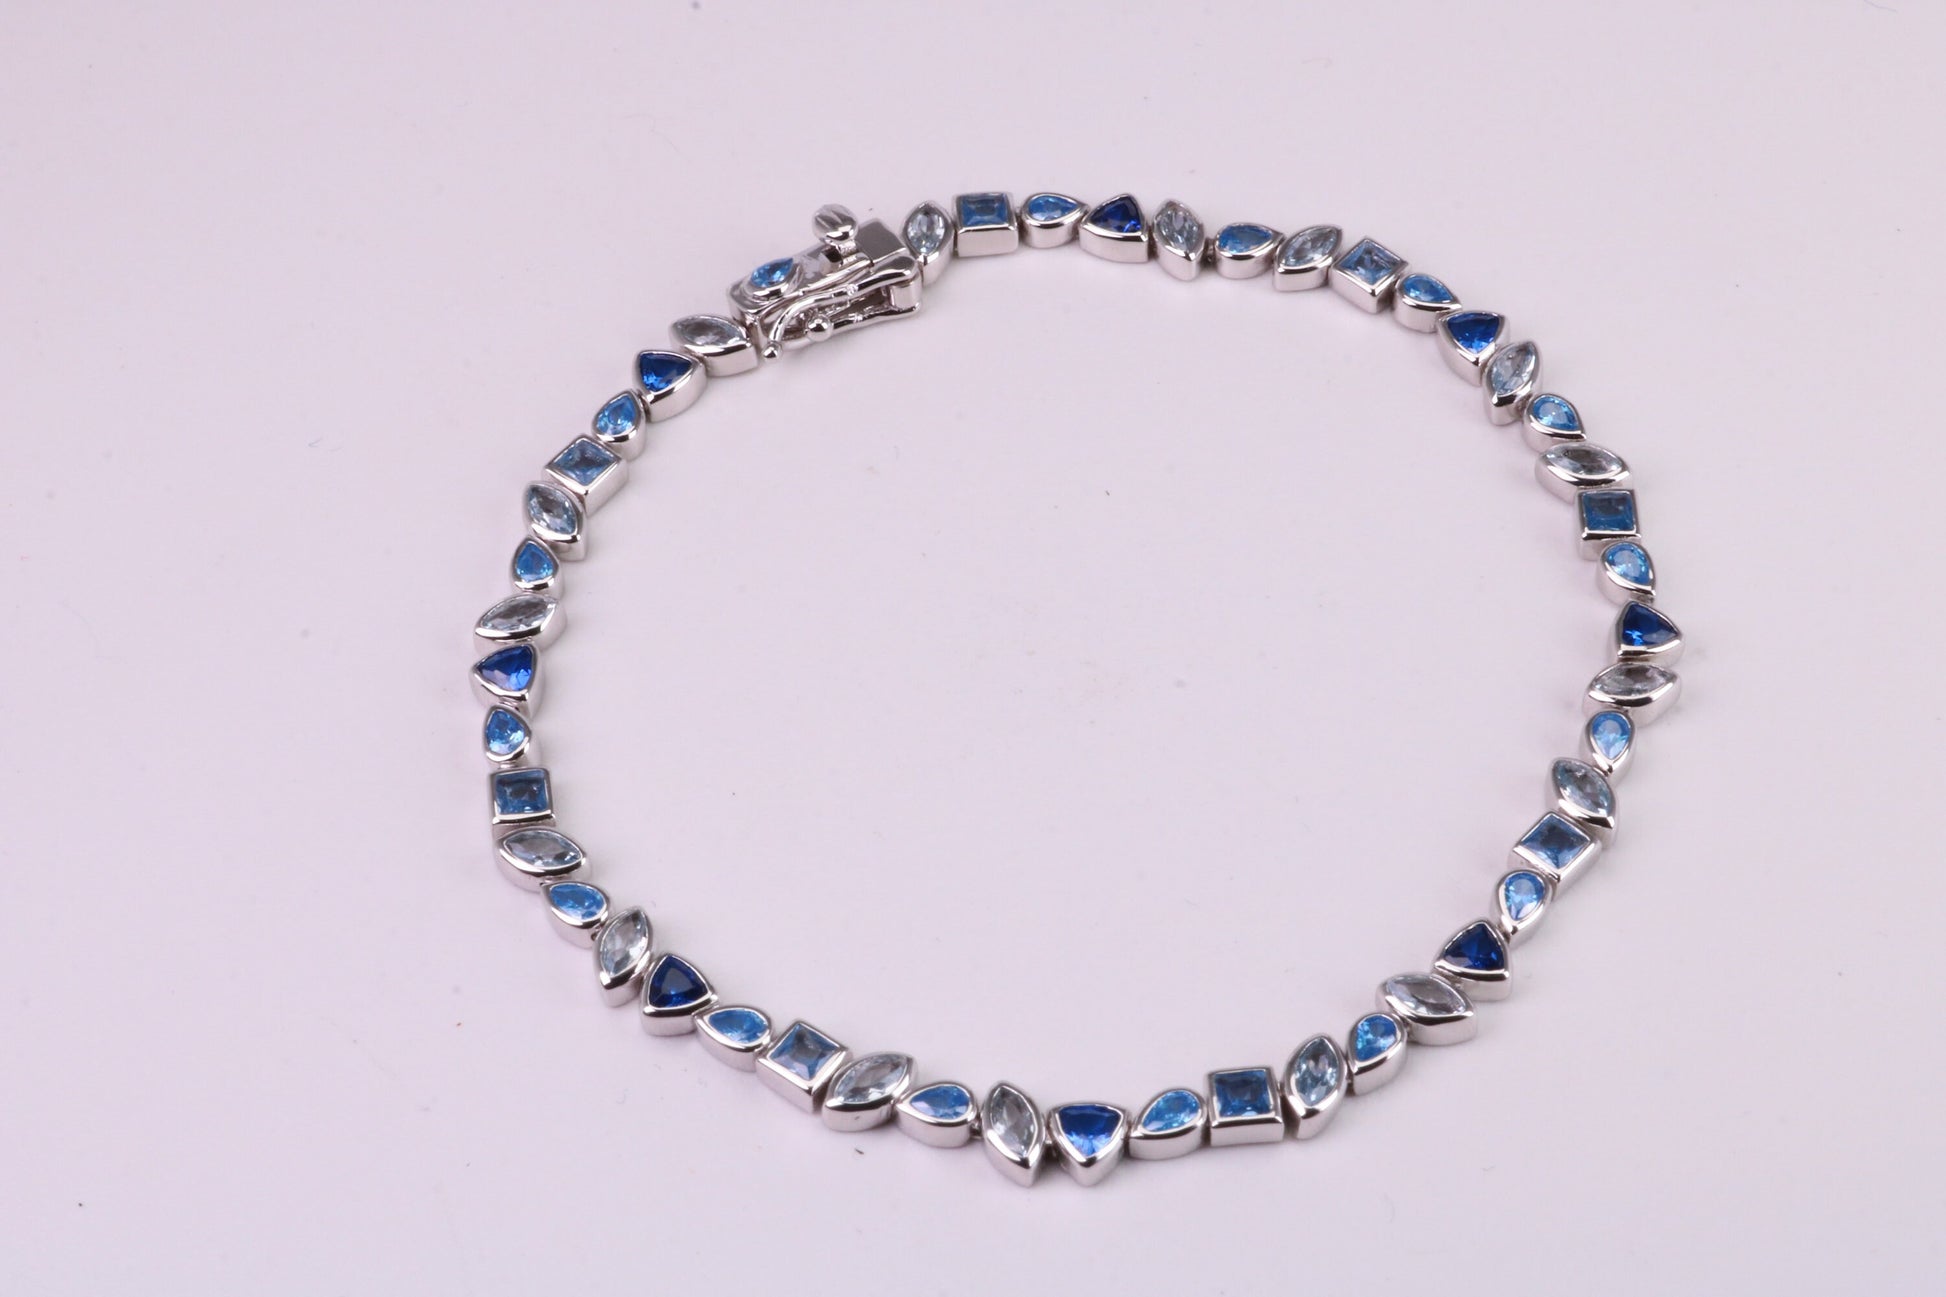 Blue Sapphire, Aquamarine and Topaz C Z Set Bracelet, 7.50 inch Length, Made from solid Sterling Silver